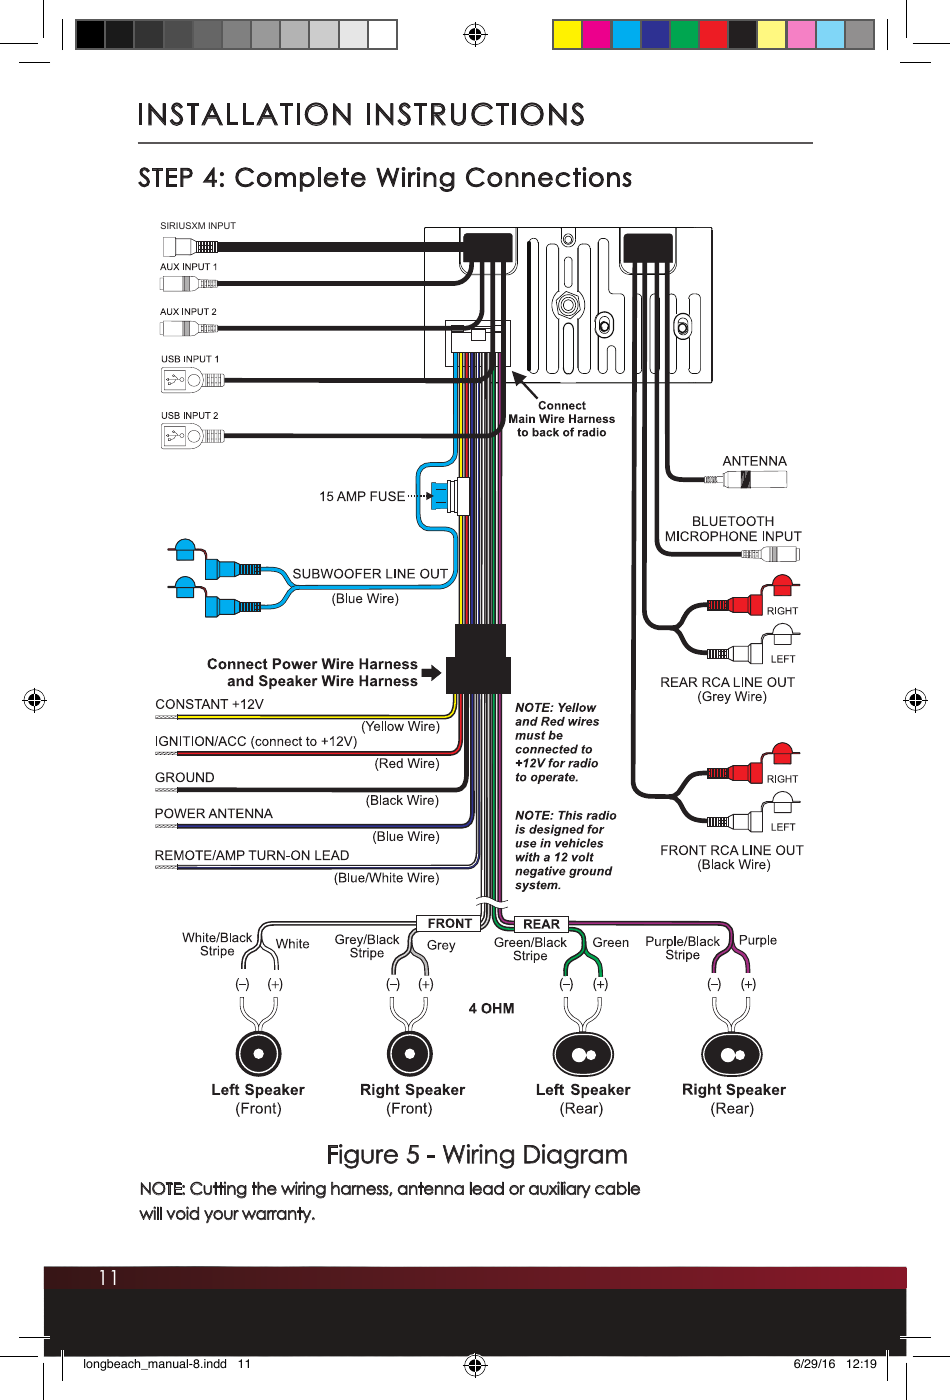 11INSTALLATION INSTRUCTIONSFigure 5 - Wiring DiagramNOTE: Cutting the wiring harness, antenna lead or auxiliary cable  will void your warranty. STEP 4: Complete Wiring ConnectionsSIRIUSXM INPUTlongbeach_manual-8.indd   11 6/29/16   12:19